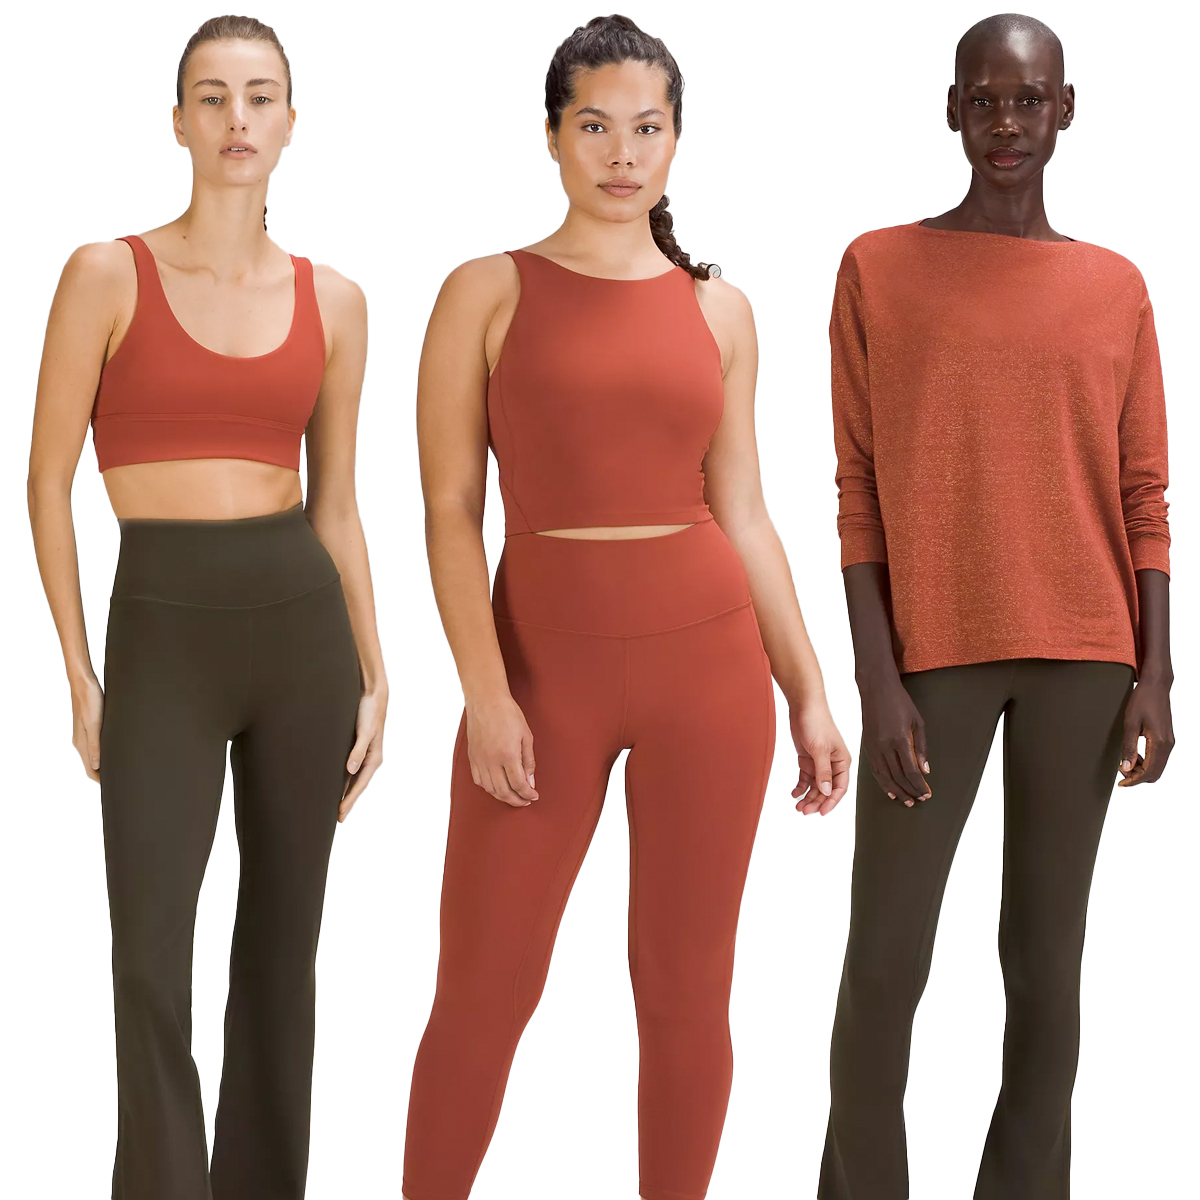 Lululemon Just Dropped a Collection Inspired by the Year of the Rabbit